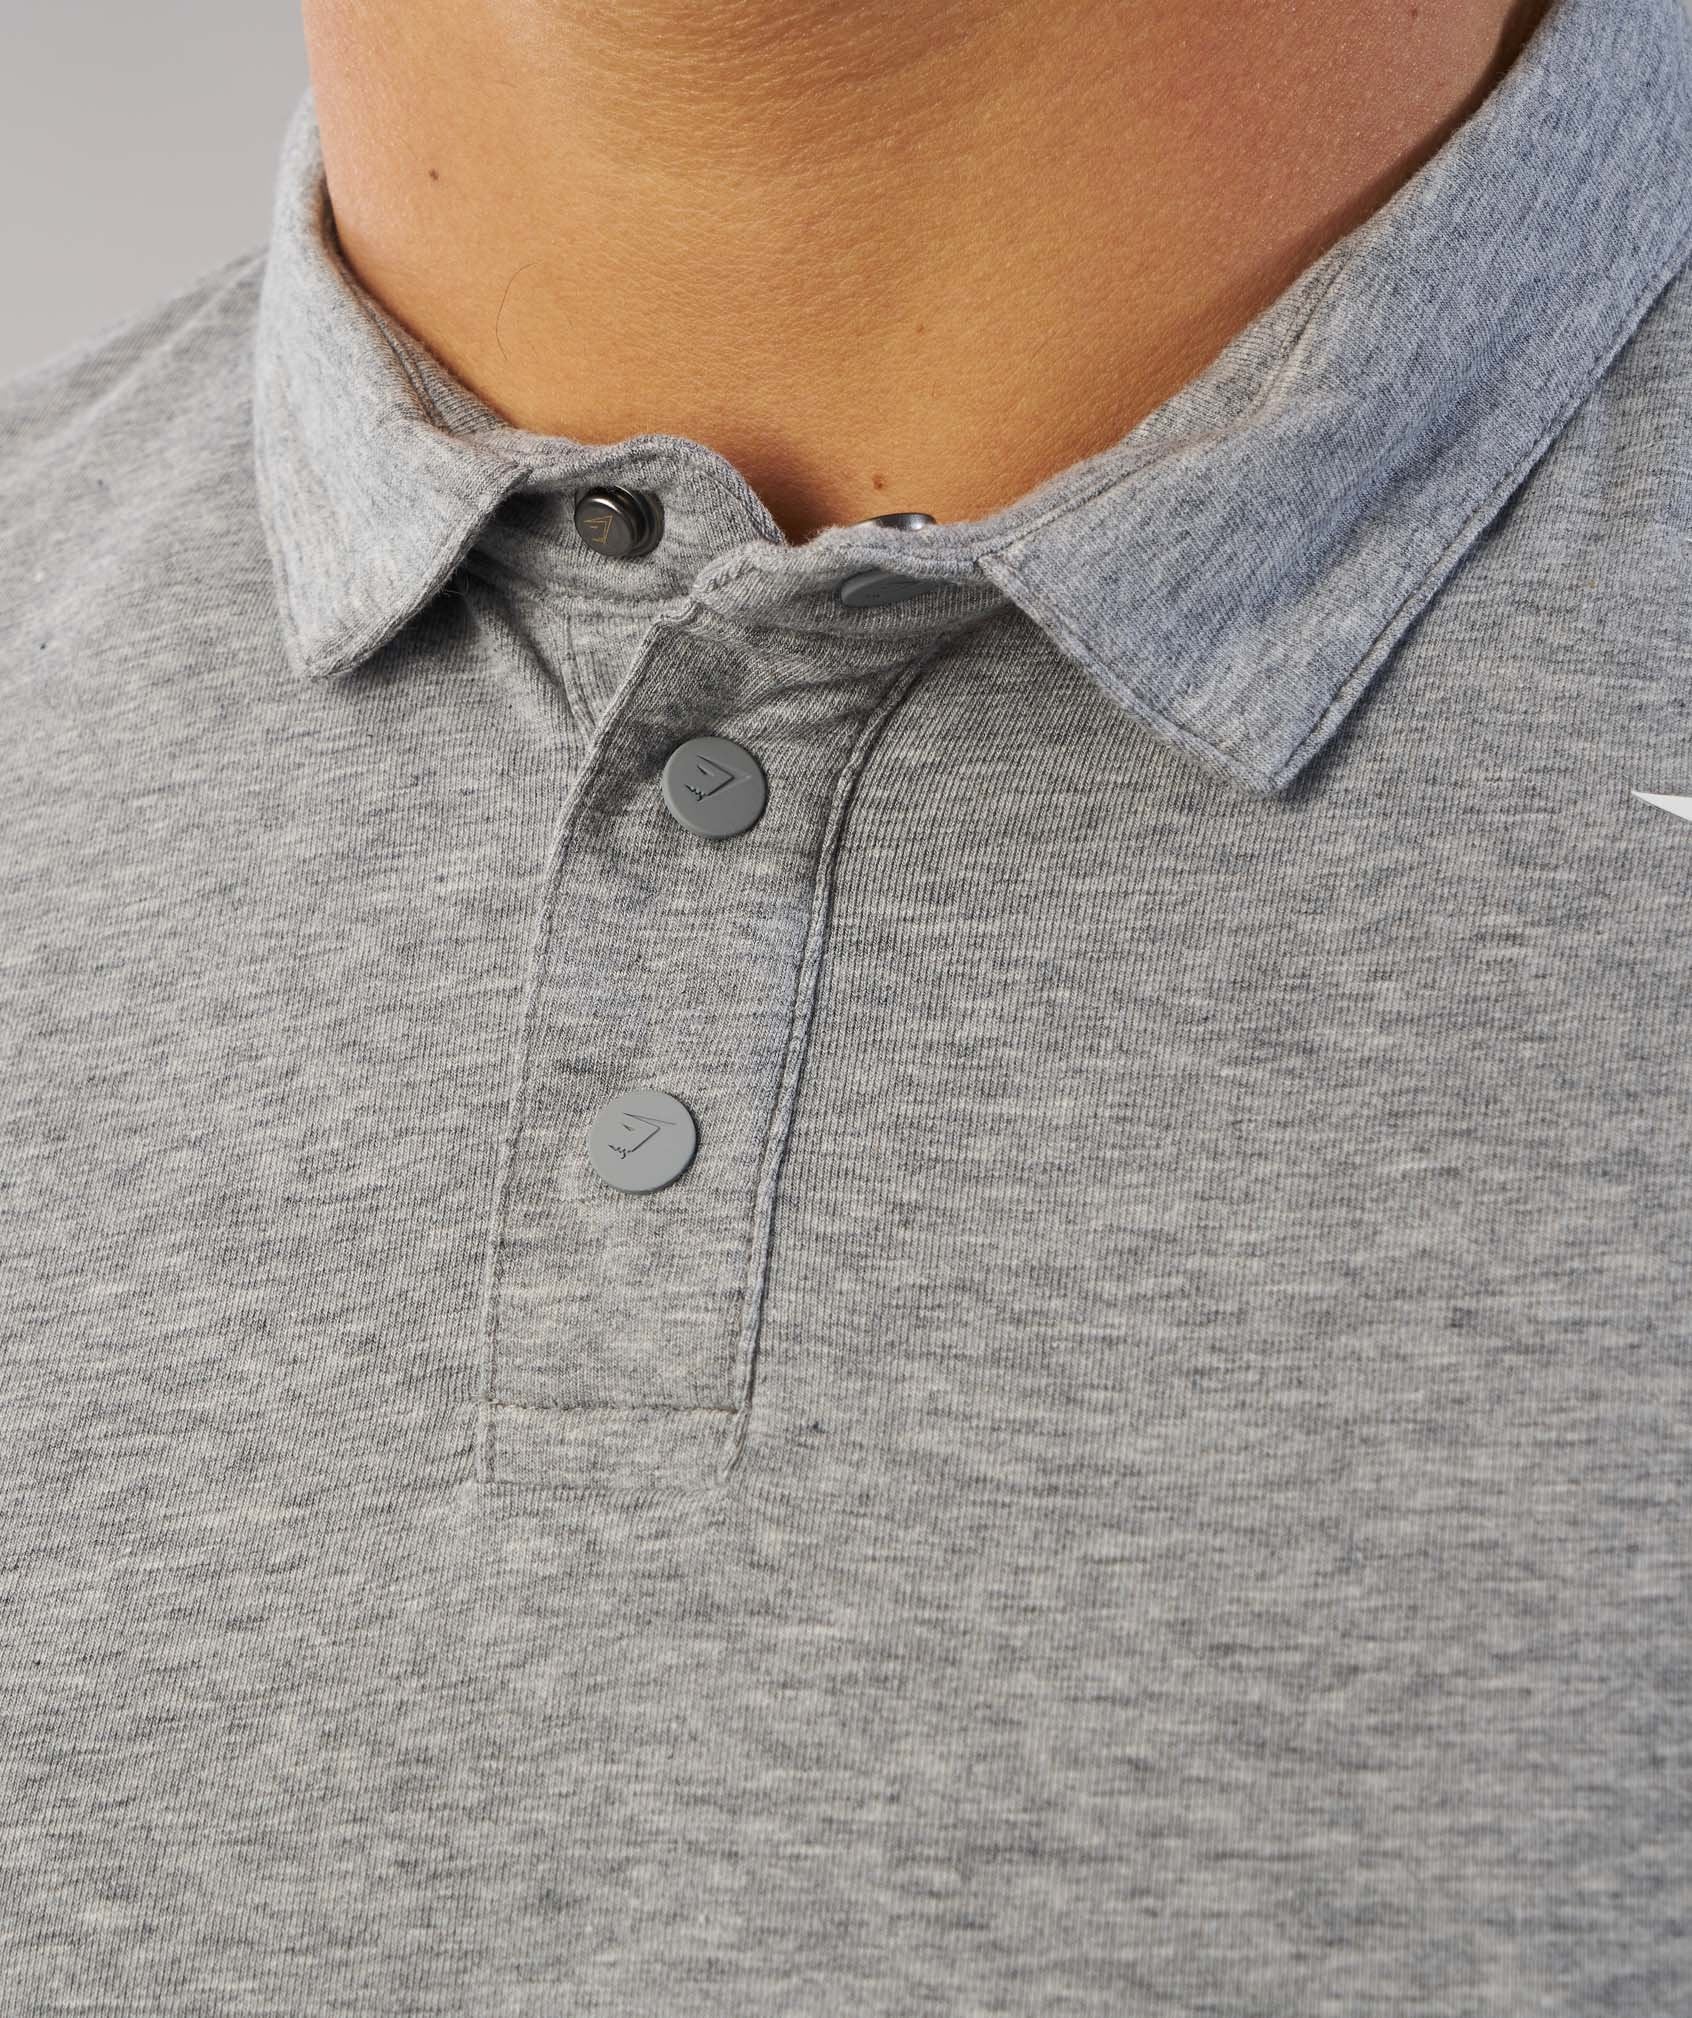 Performance Polo in Light Grey Marl - view 6